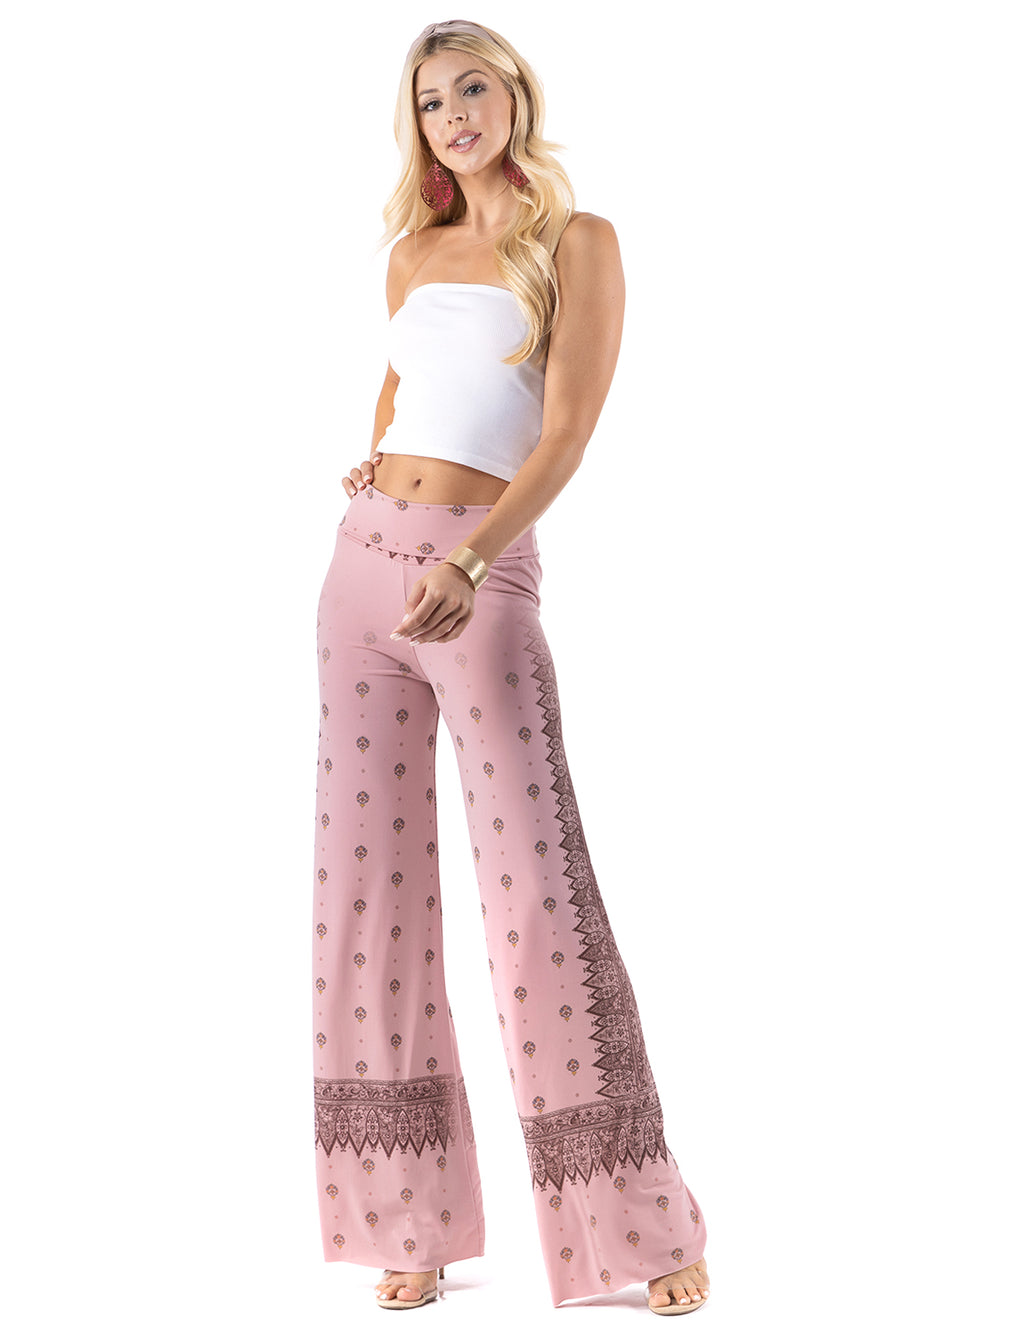 Beautiful woman wearing this amazing Pink Vintage Paisley High waist palazzo pants featuring pockets, wide legs, and a comfortable stretchy fabric Perfect during spring, summer,Concerts, Festivals, Dance, Brunch